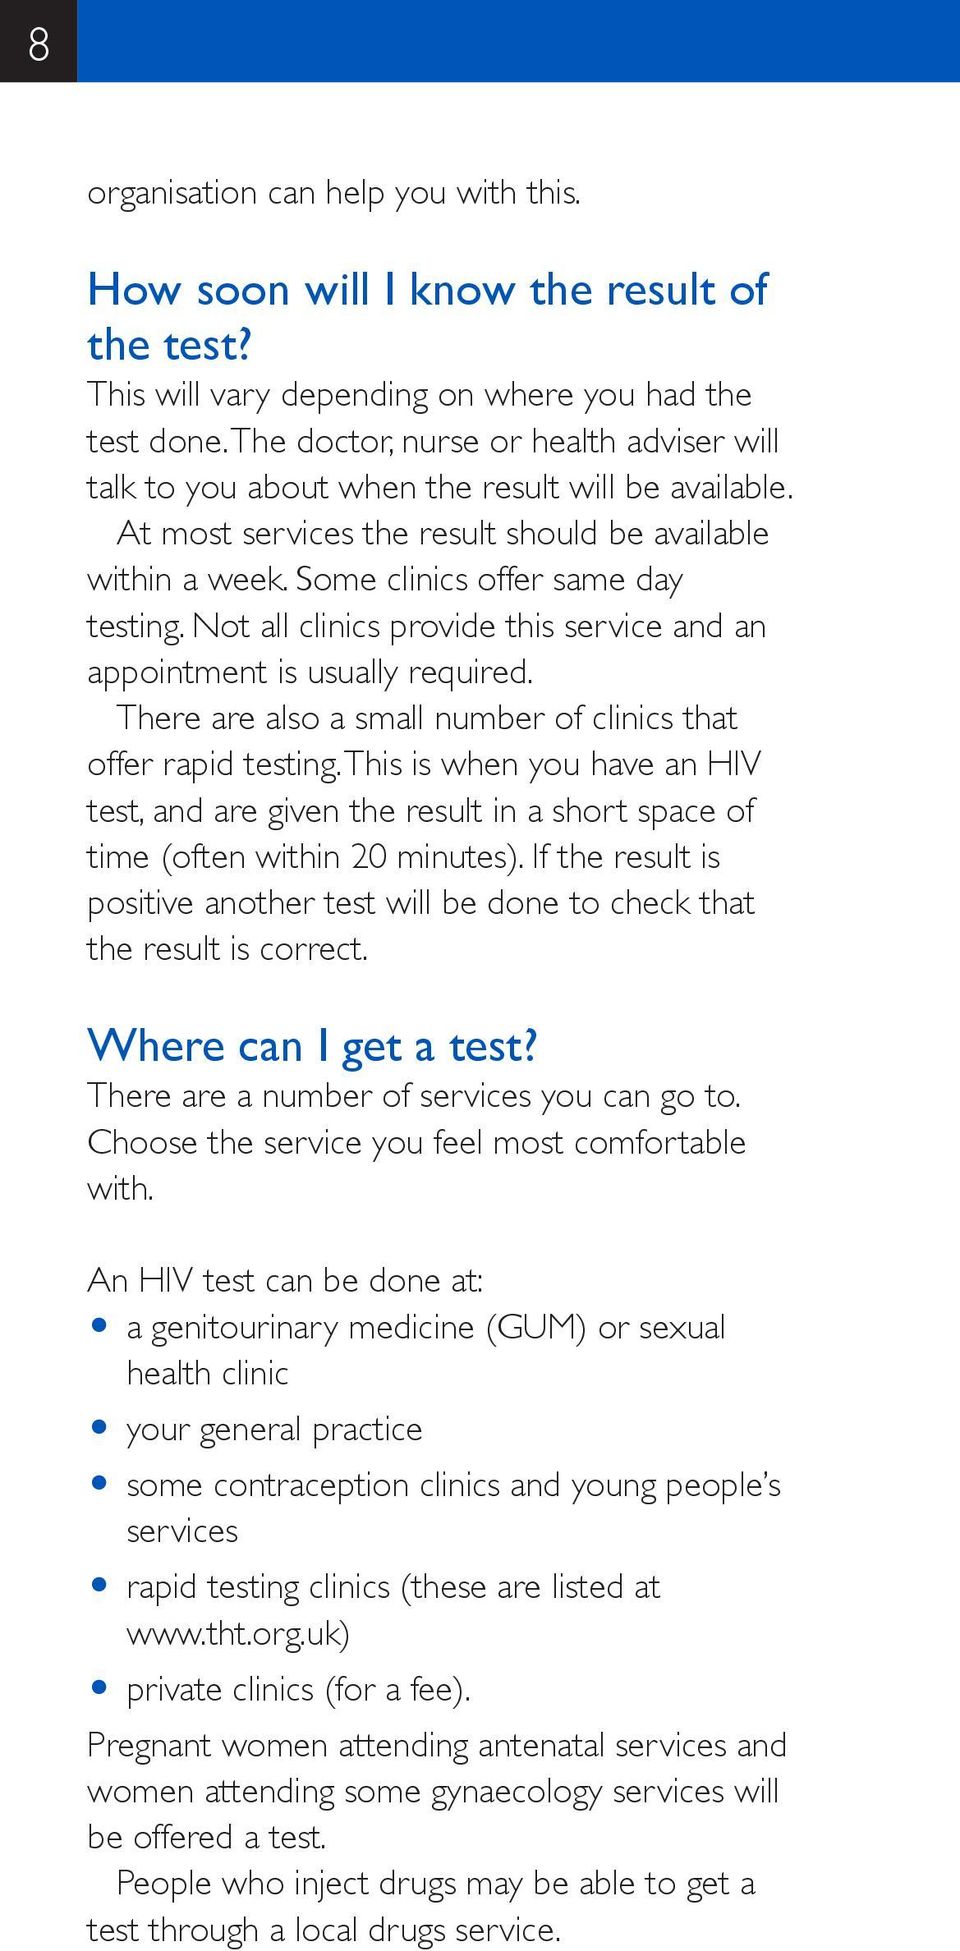 Not all clinics provide this service and an appointment is usually required. There are also a small number of clinics that offer rapid testing.